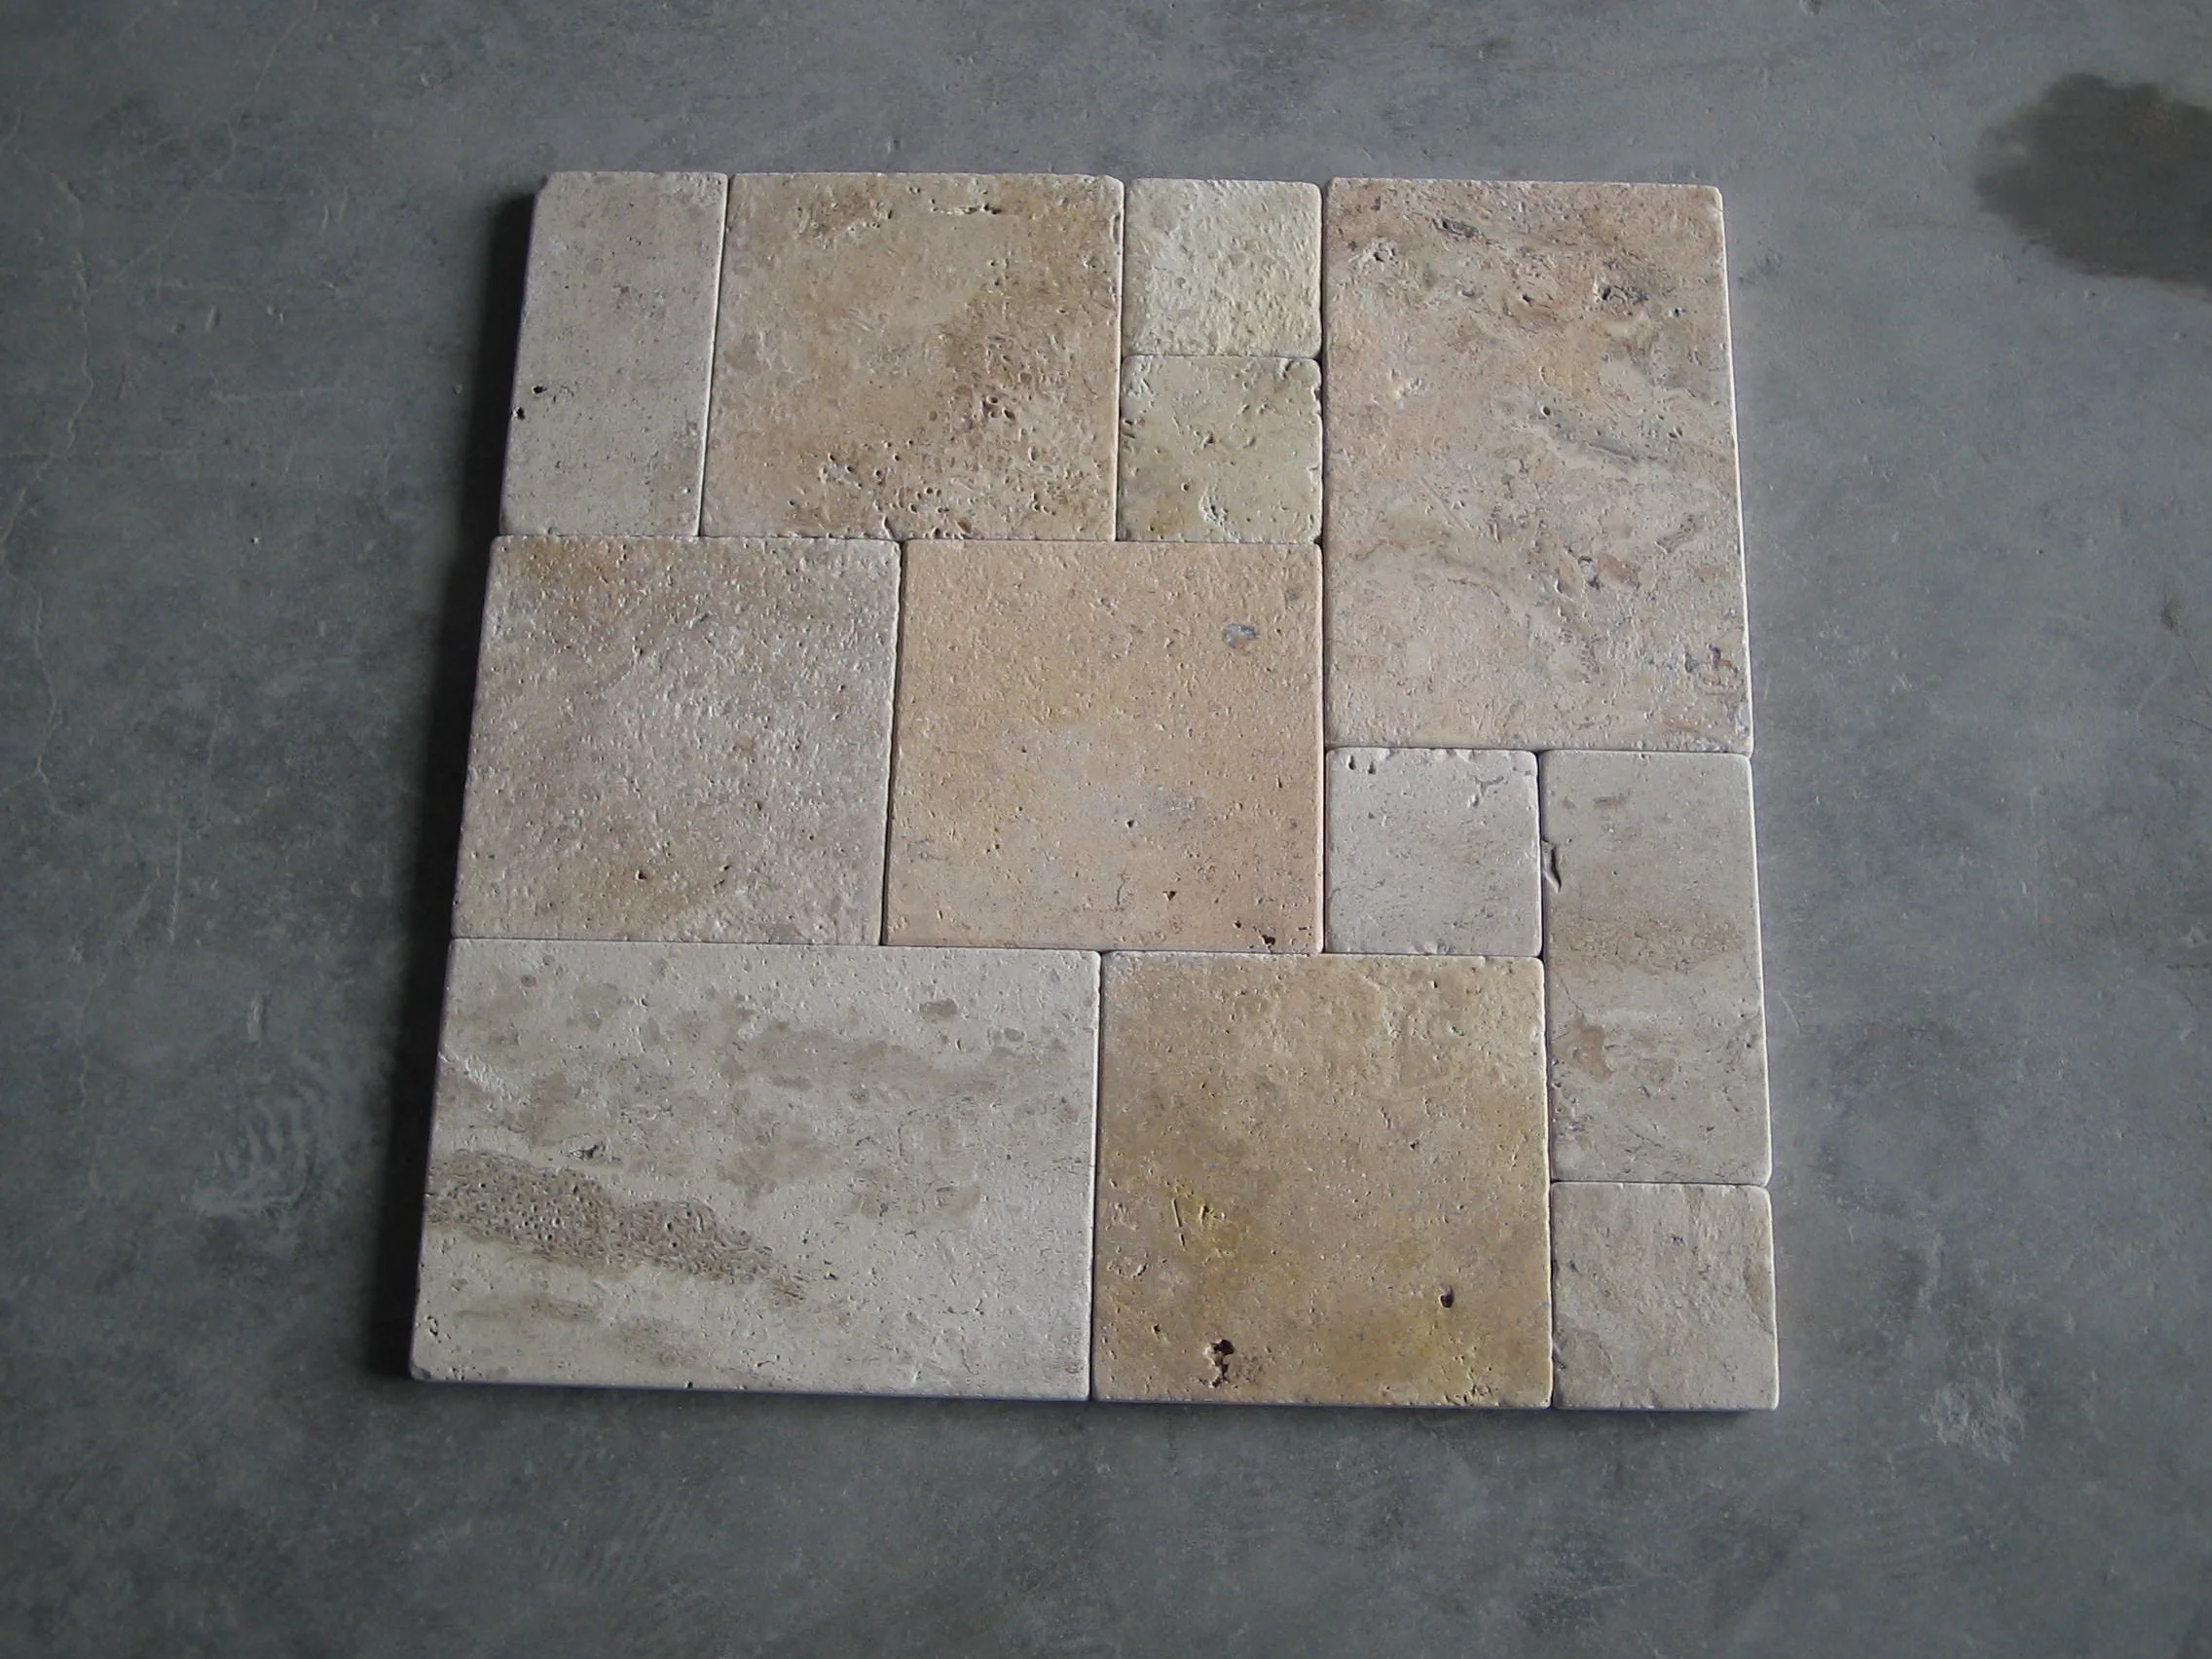 Panel Mosaic Design Prefab Laminated Panel Travertine Tile Composed Marble T9S Natural Polished Tiles Square FIRST Stone 10-12mm